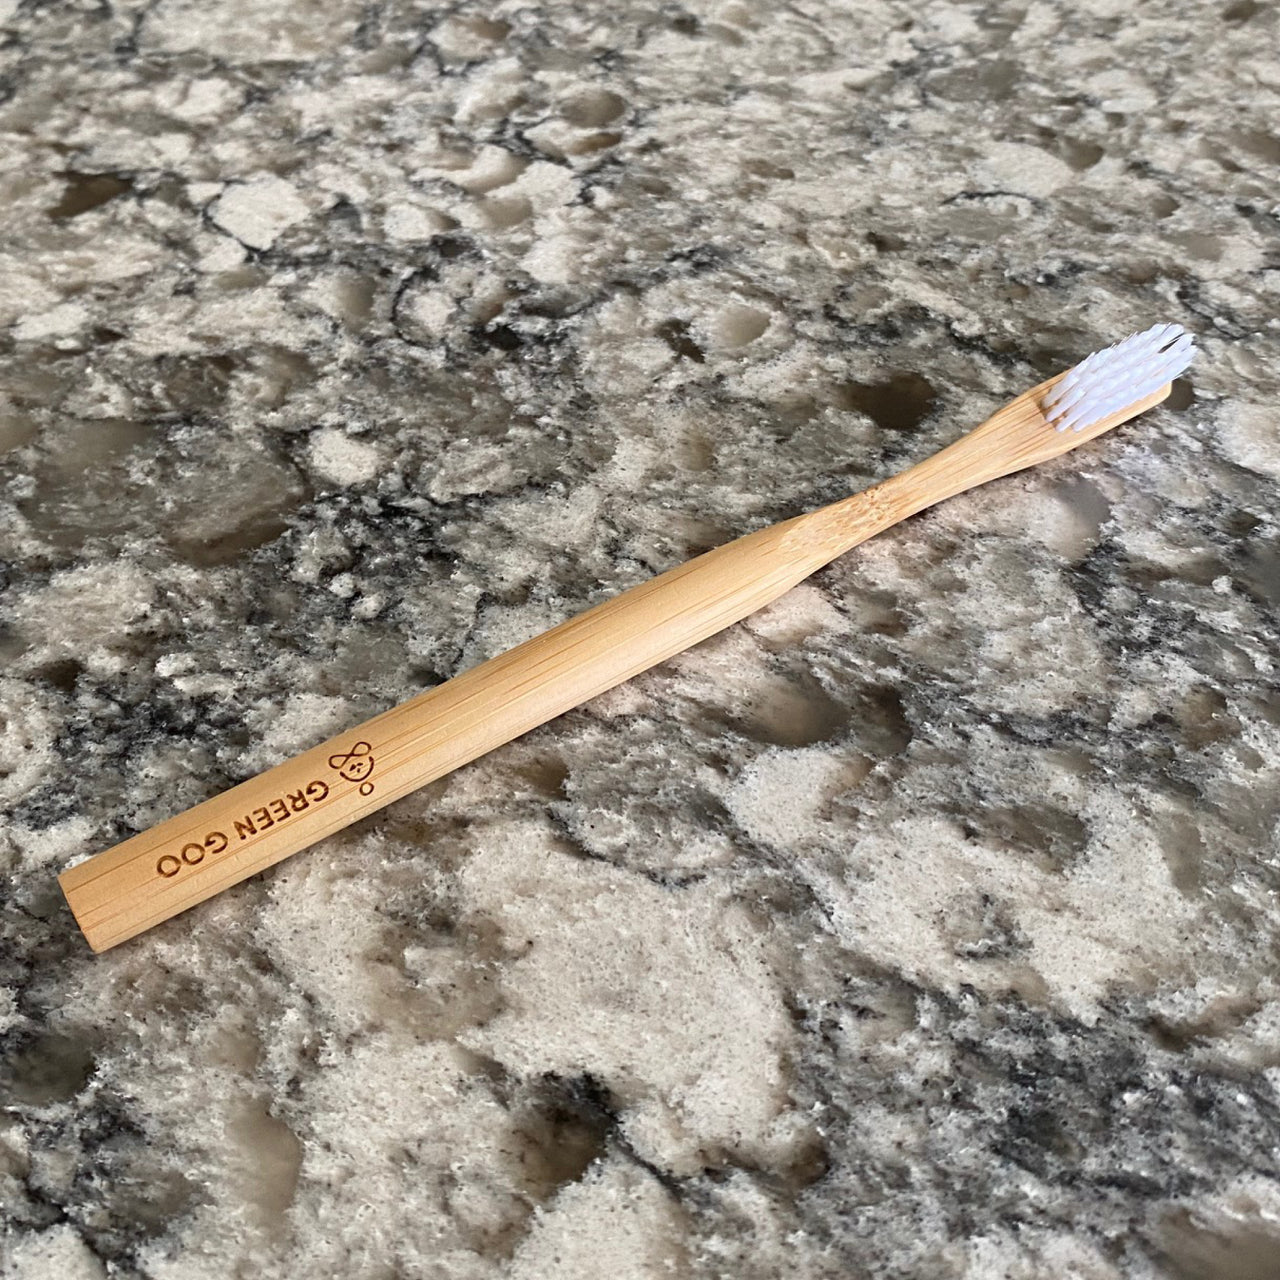 Plant-Based Bamboo Toothbrush